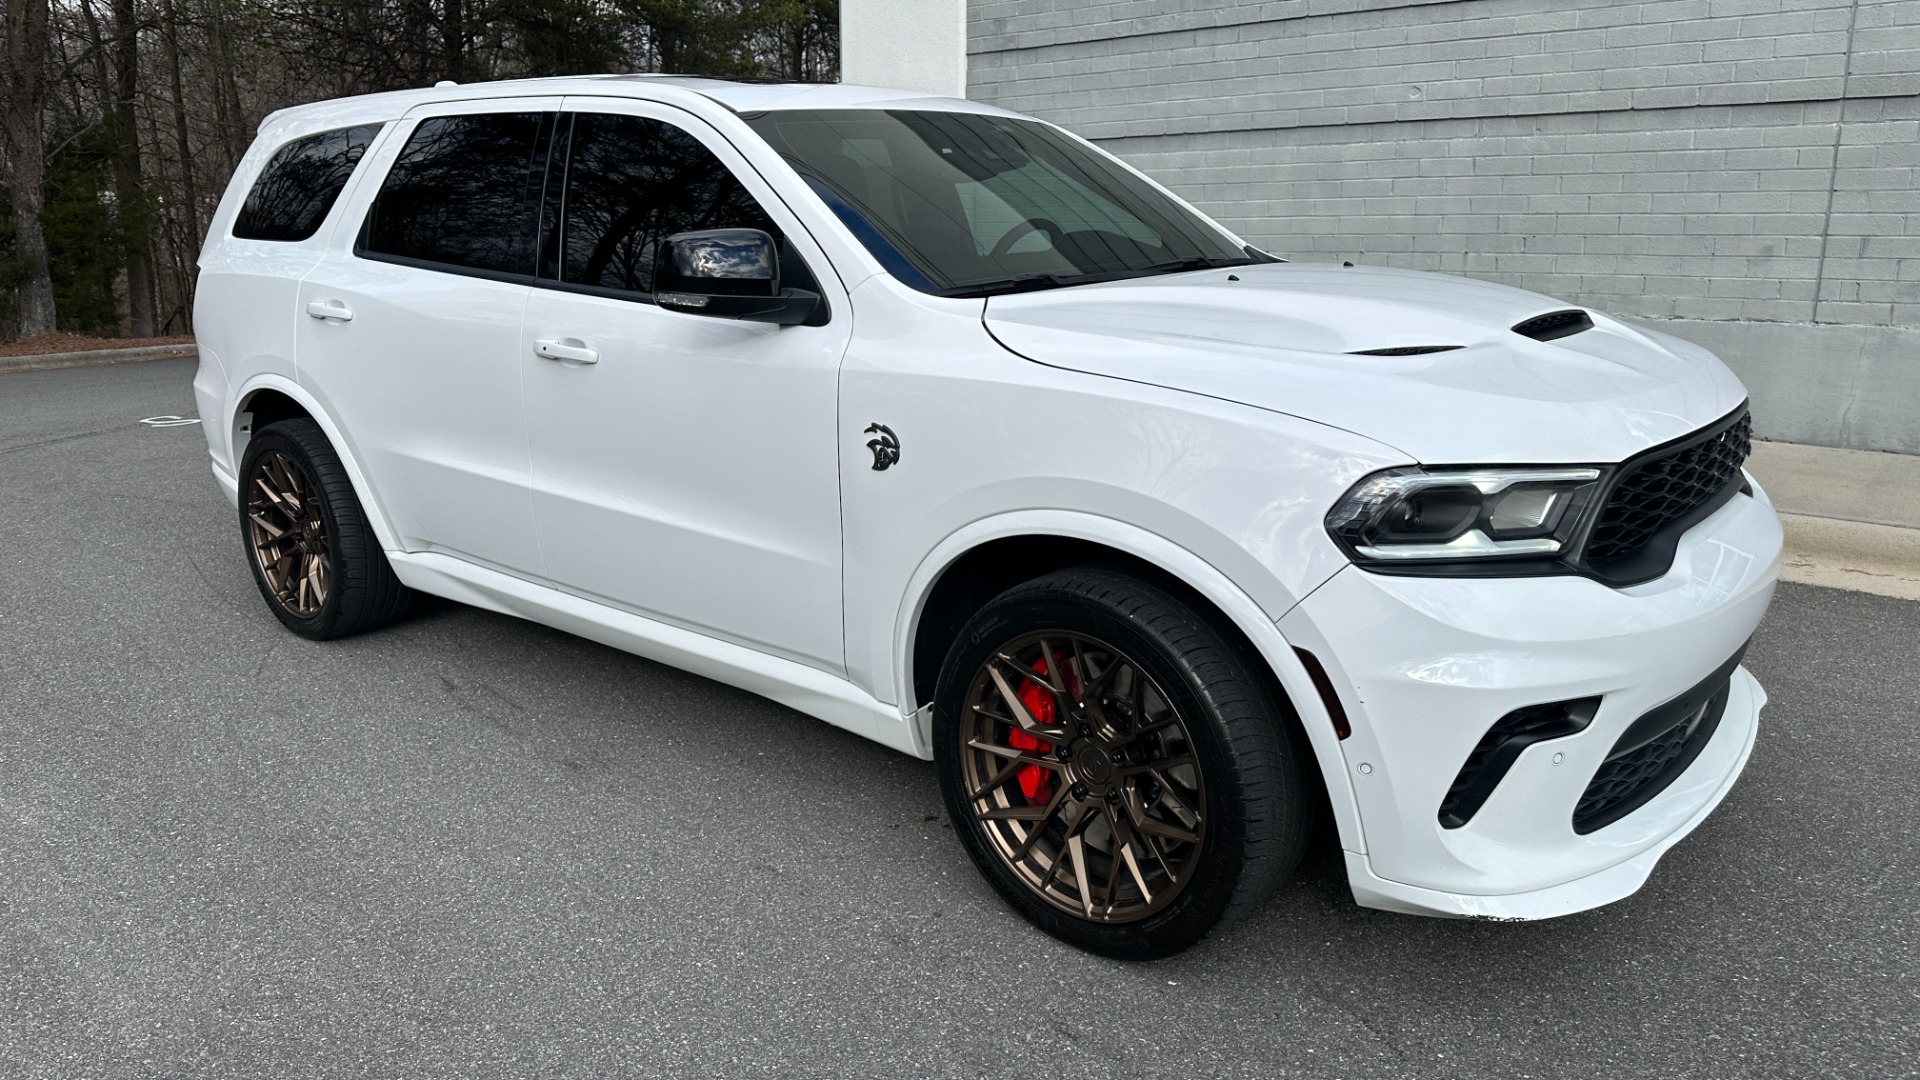 Used 2021 Dodge Durango SRT HELLCAT / CAPTAIN CHAIRS / DVD SCREENS / INTAKE / PULLEY for sale $98,495 at Formula Imports in Charlotte NC 28227 2